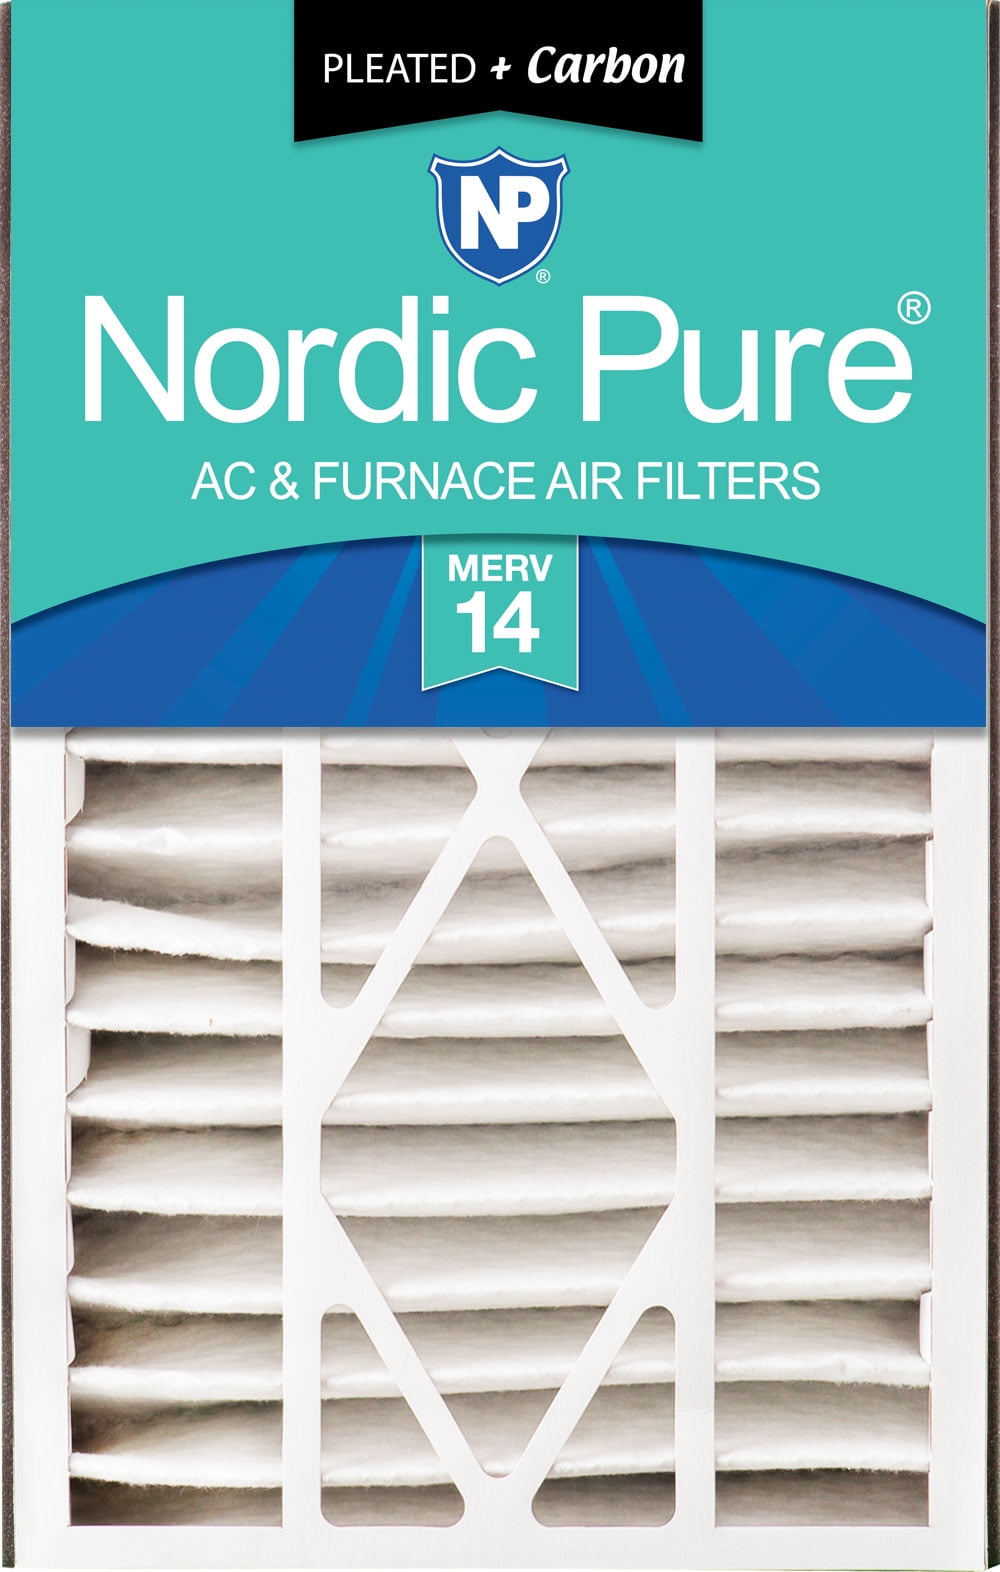 Pleated Paper Air Filter for Lawn Equipment Rectangular 7 1/8" x 2 1/4" x 3/4" 